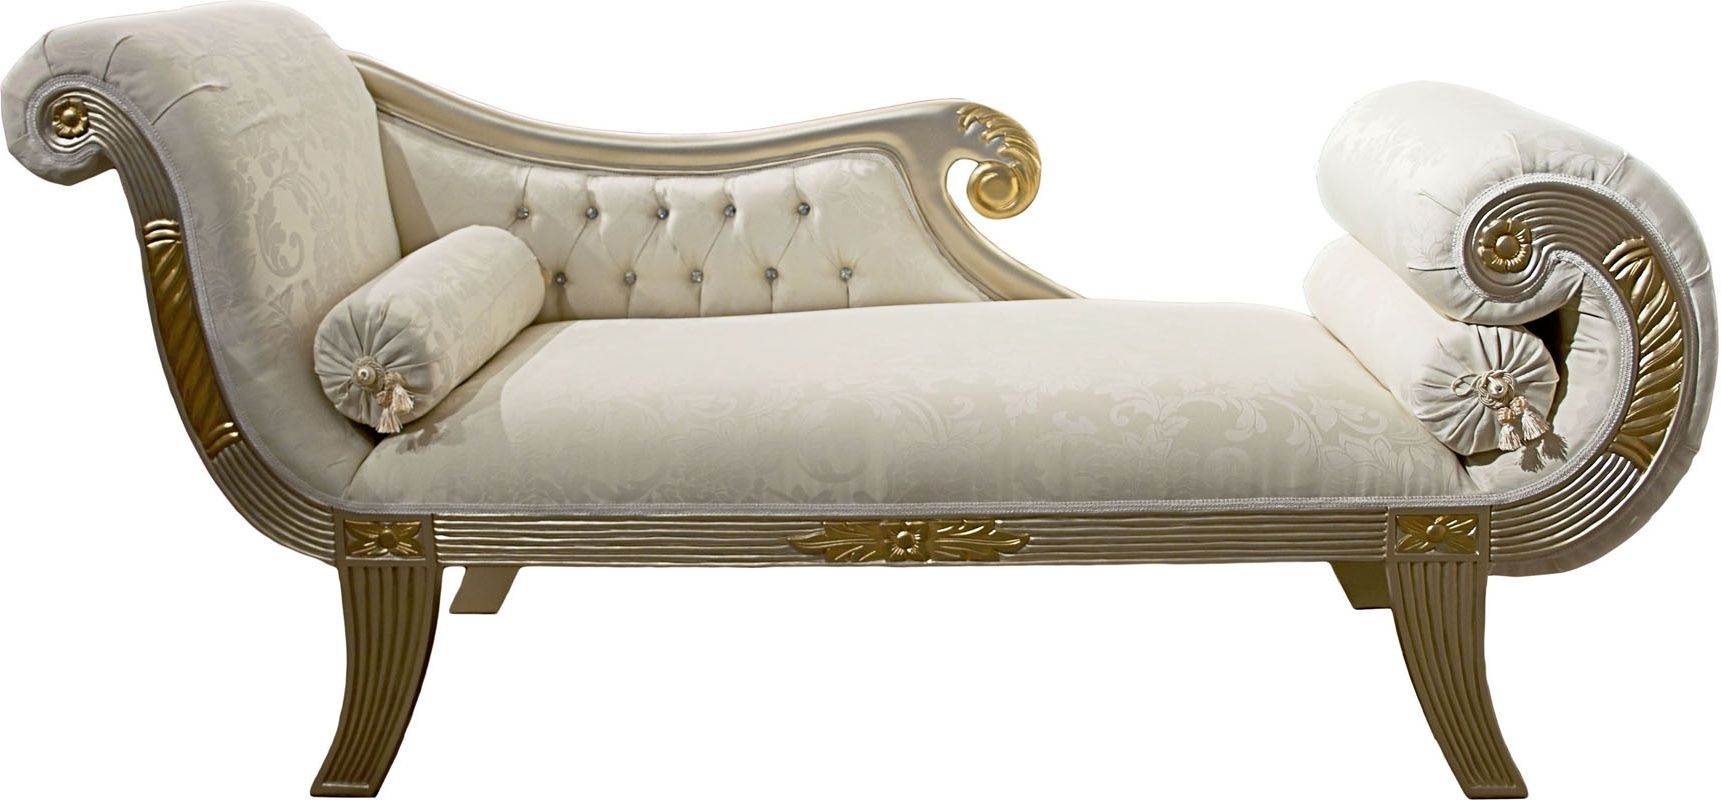 Newest White Leather Vintage Chaise Lounge Chair In Victorian Style Plus With Elegant Chaise Lounge Chairs (View 1 of 15)